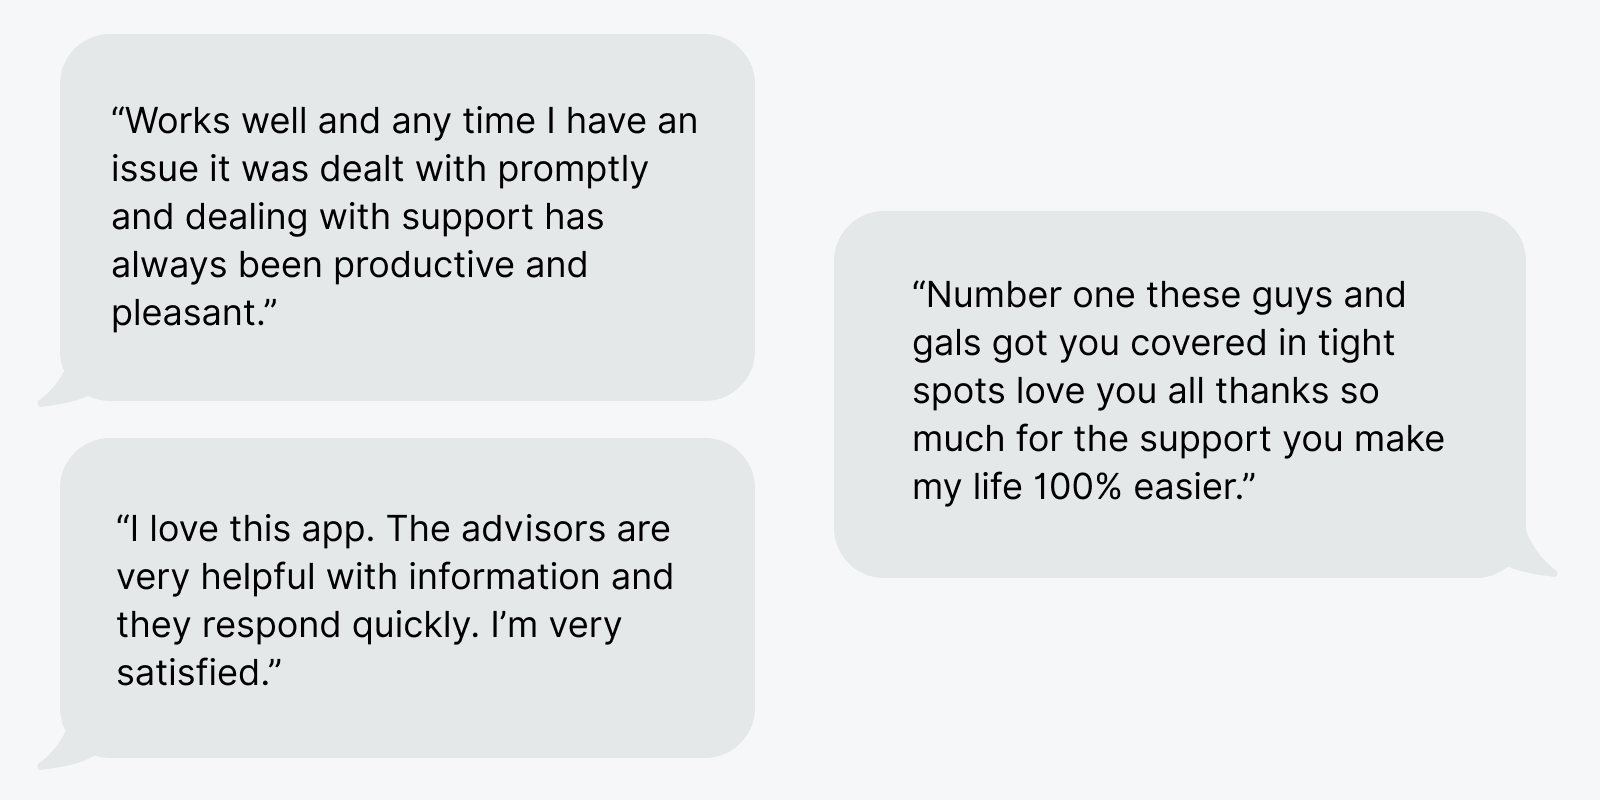 Text bubbles showing member reviews. The first one says, “Works well and any time I have an issue it was dealt with promptly and dealing with support has always been productive and pleasant.” The second one says, “I love this app. The advisors are very helpful with information and they respond quickly. I’m very satisfied.” The last one says, “Number one these guys and gals got you covered in with spots love you all thanks so much for the support you make my life 100% easier.”